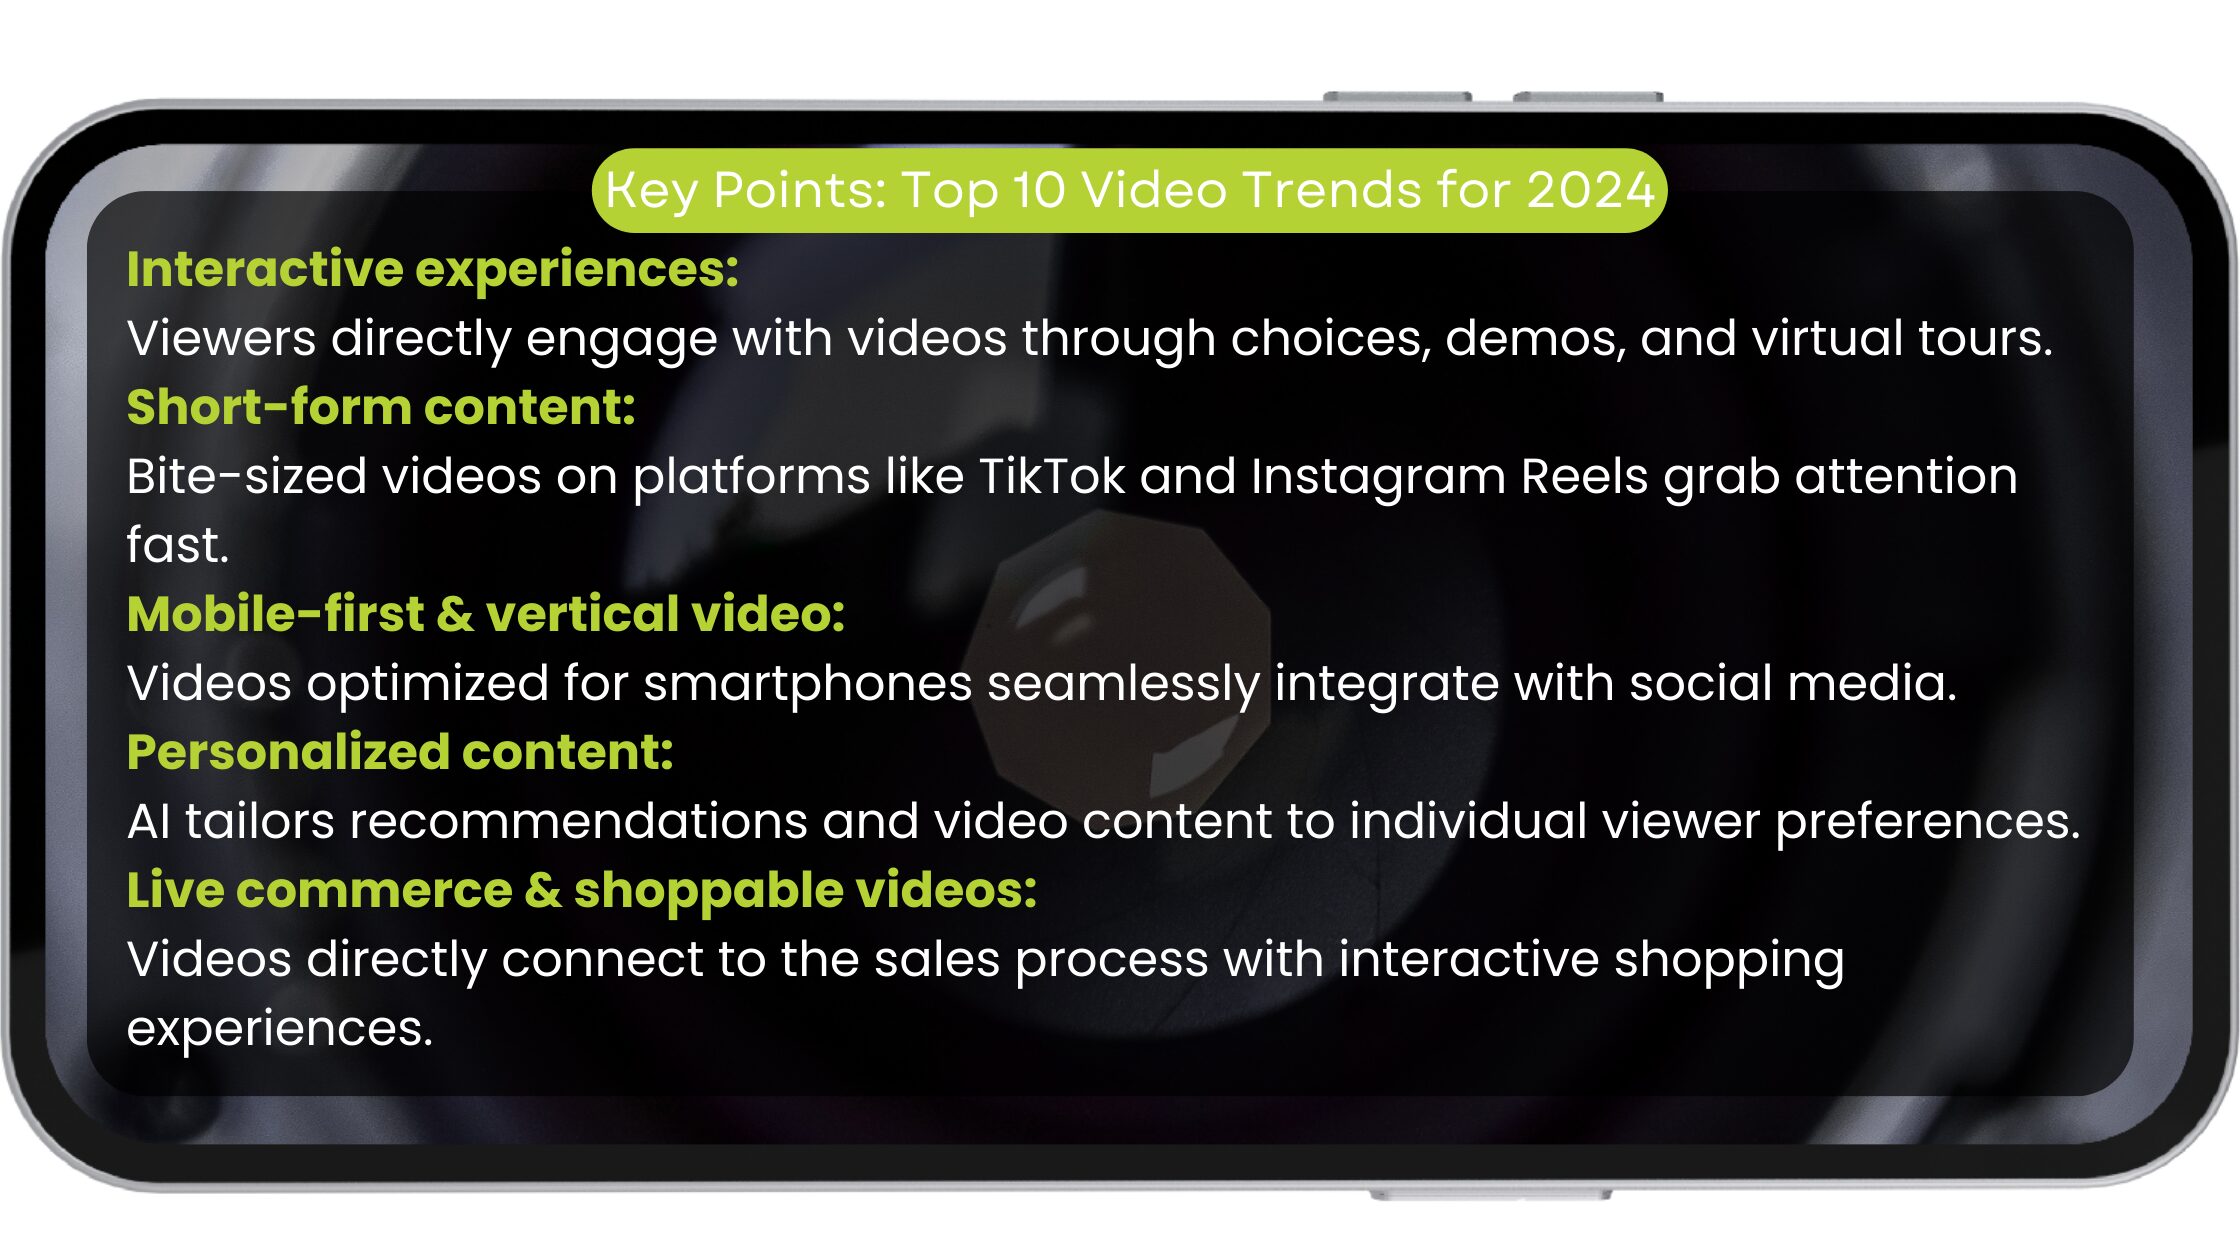 Key Points: Top 10 Video Trends for 2024 